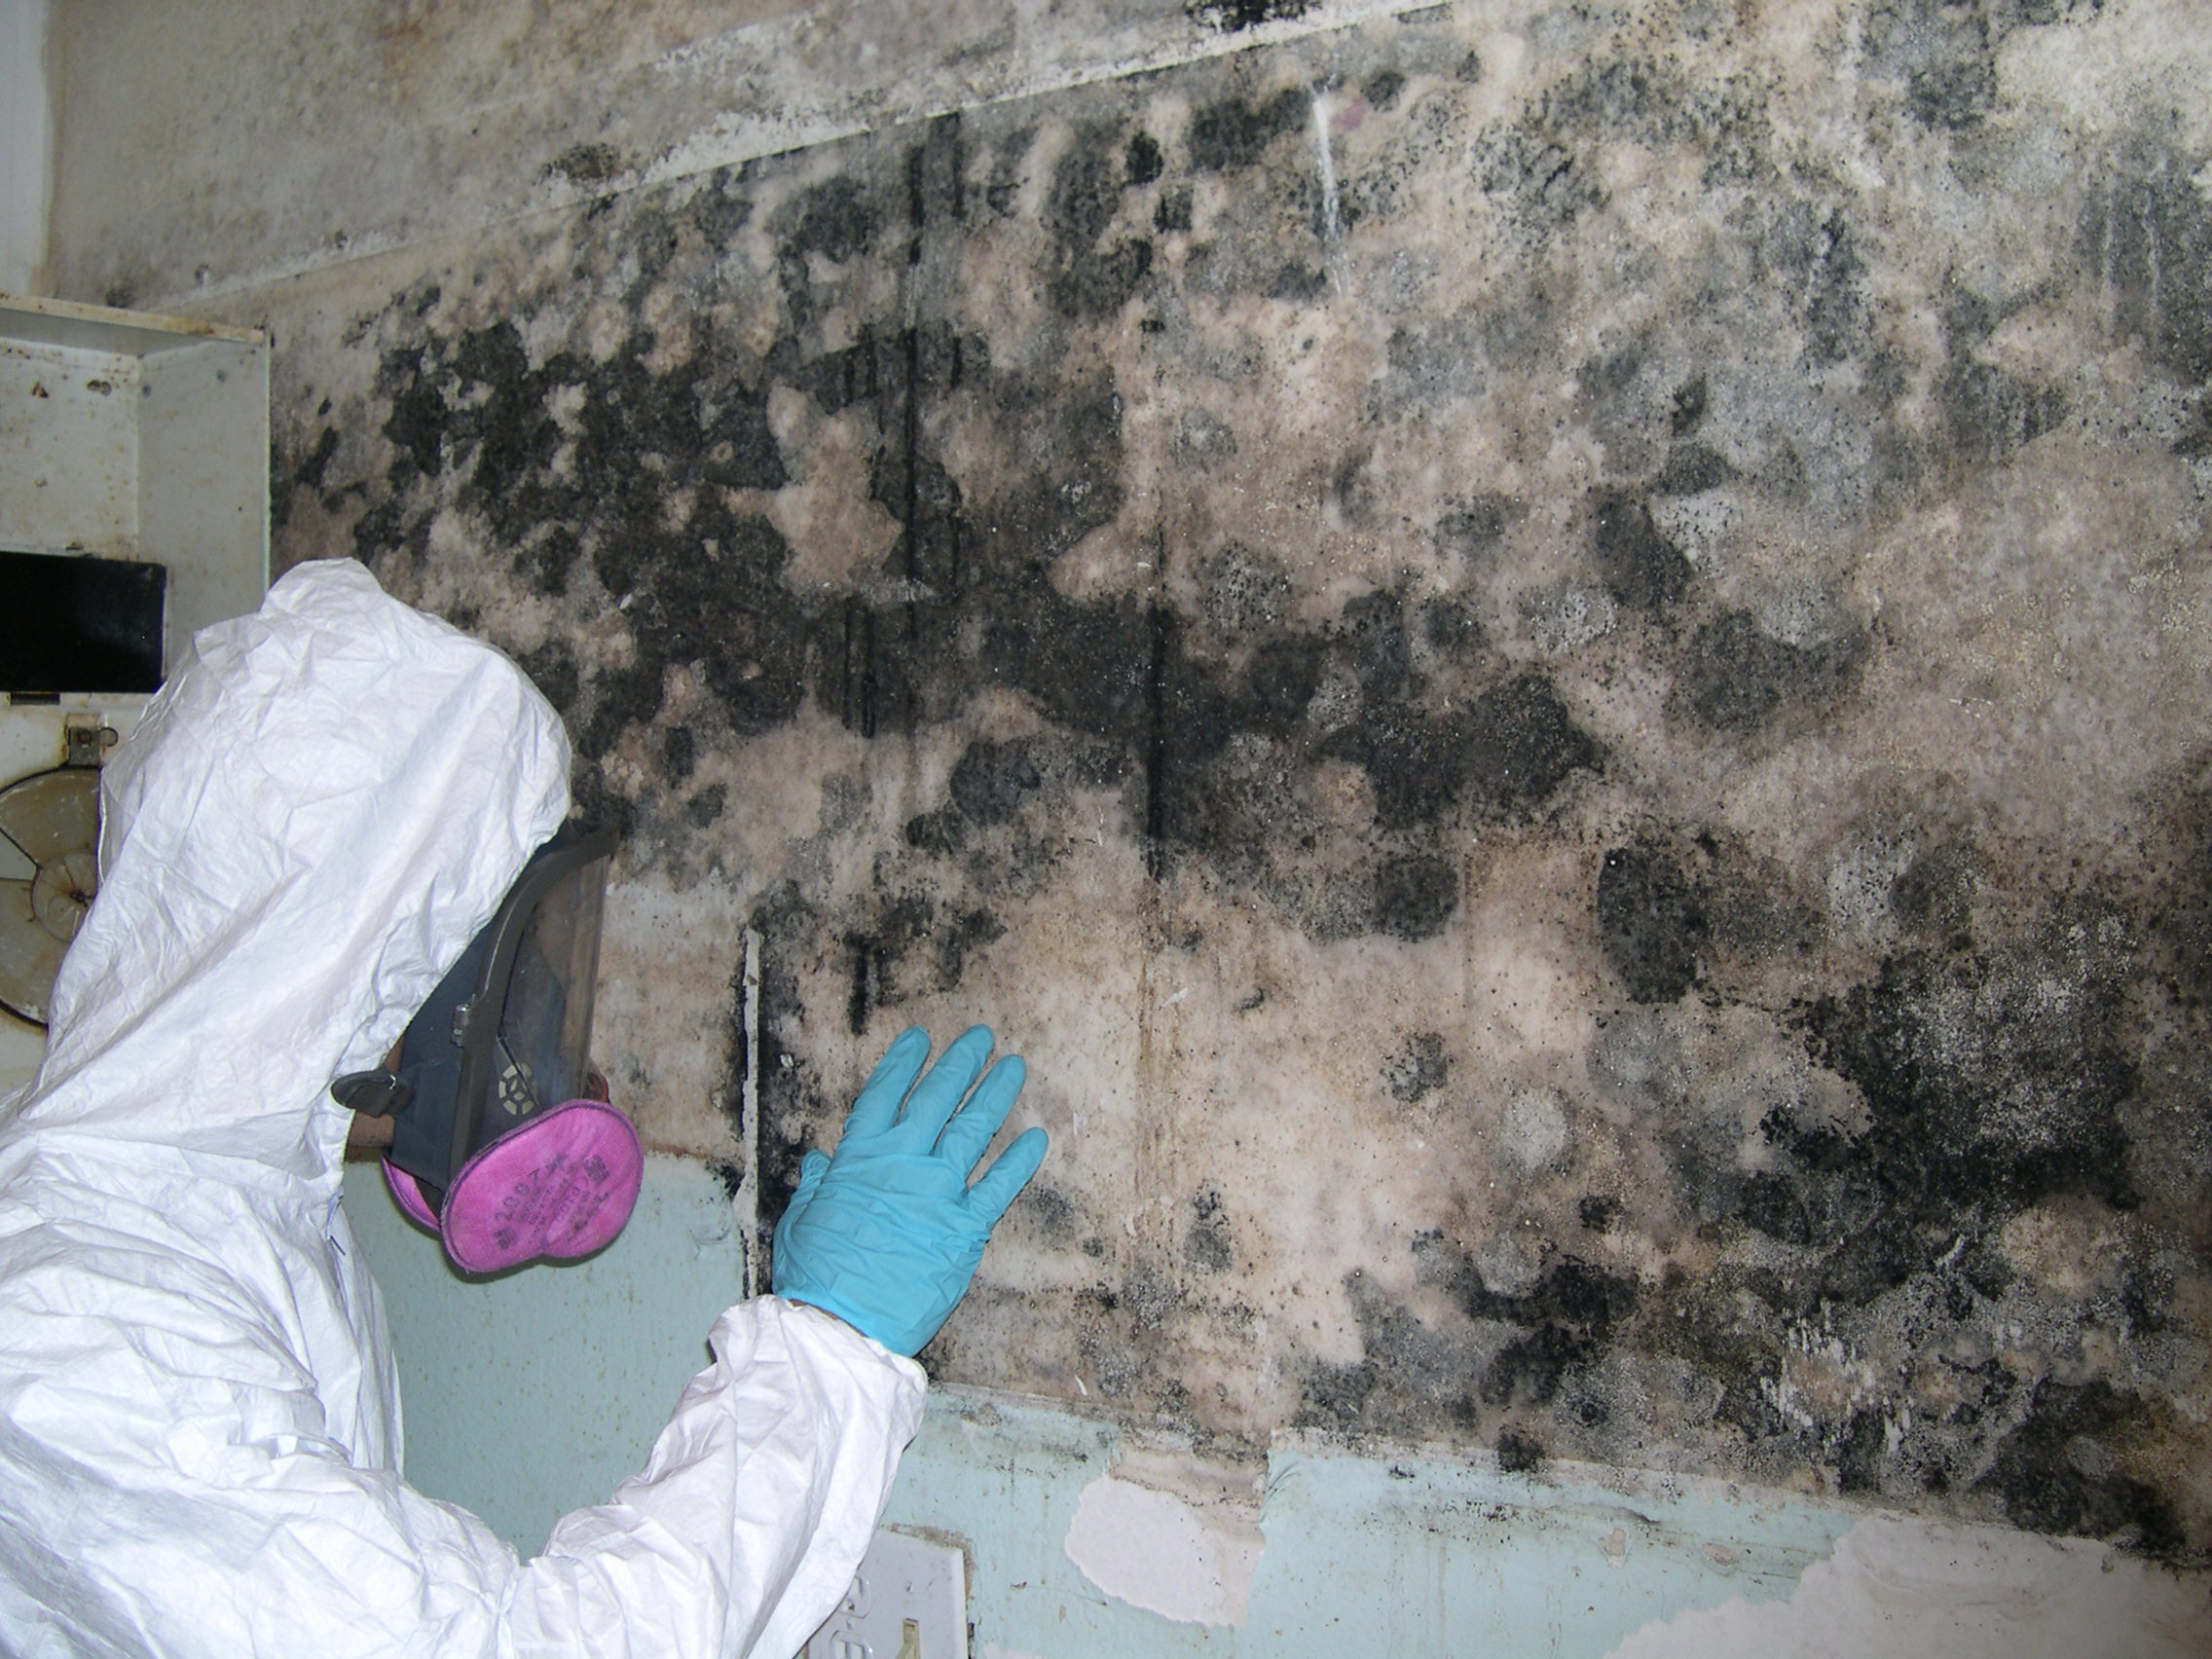 Mold Remediation Specialist - Checking the mold growing in the walls